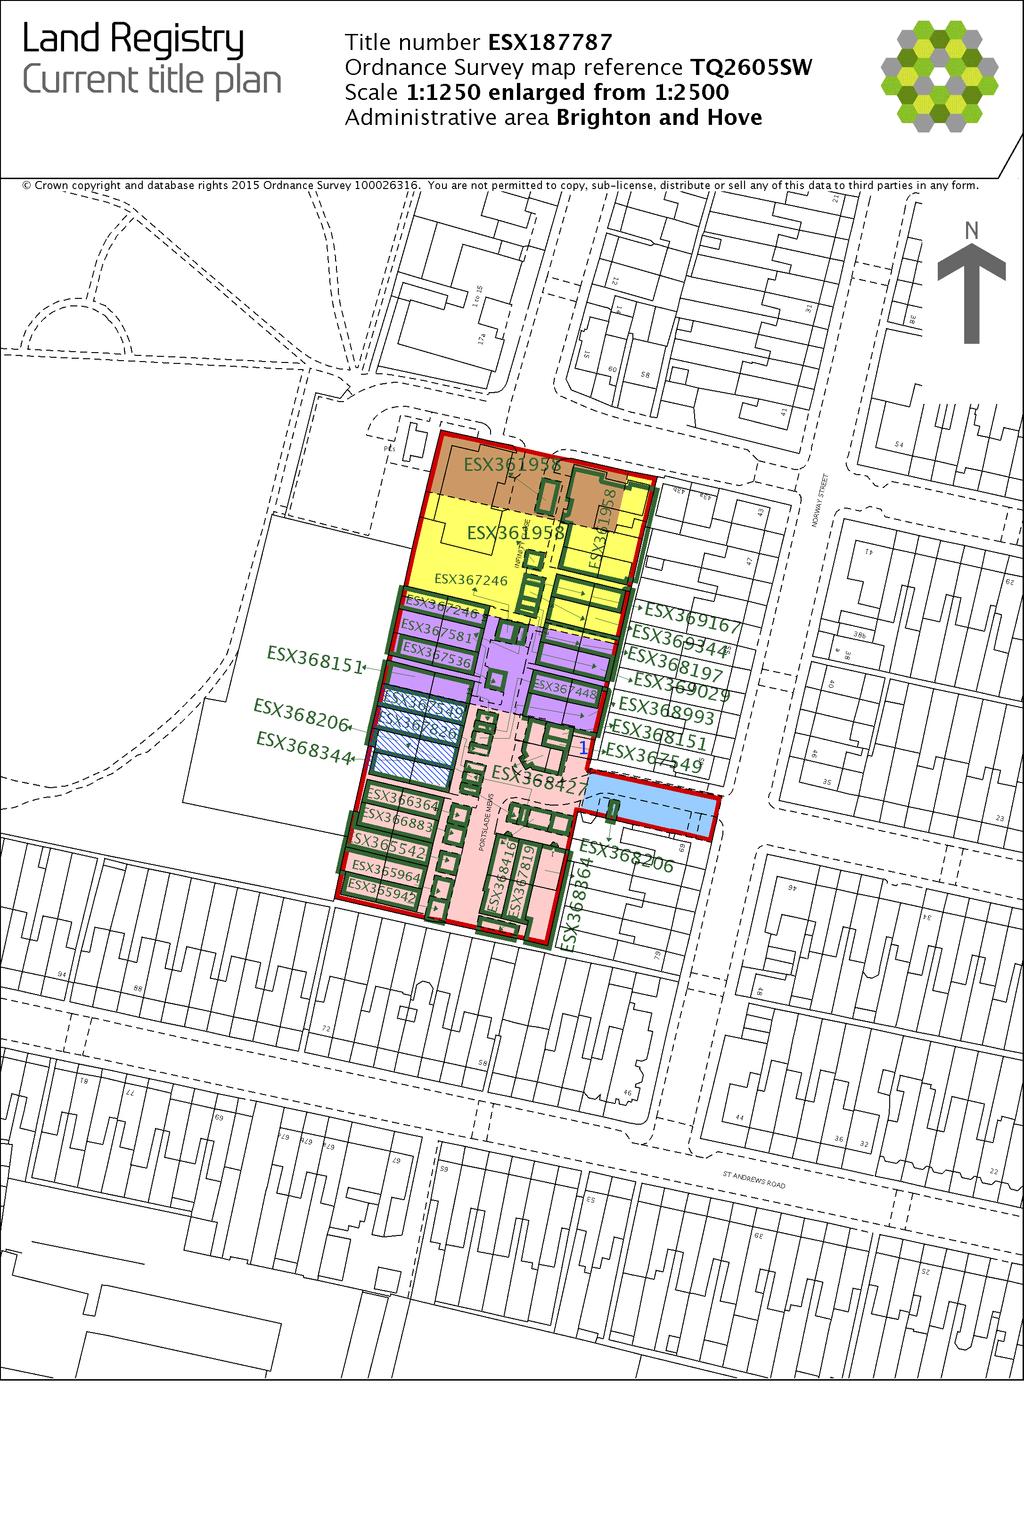 This is a print of the view of the title plan obtained from Land Registry showing the state of the title plan on 25 November 2016 at 15:49:23.